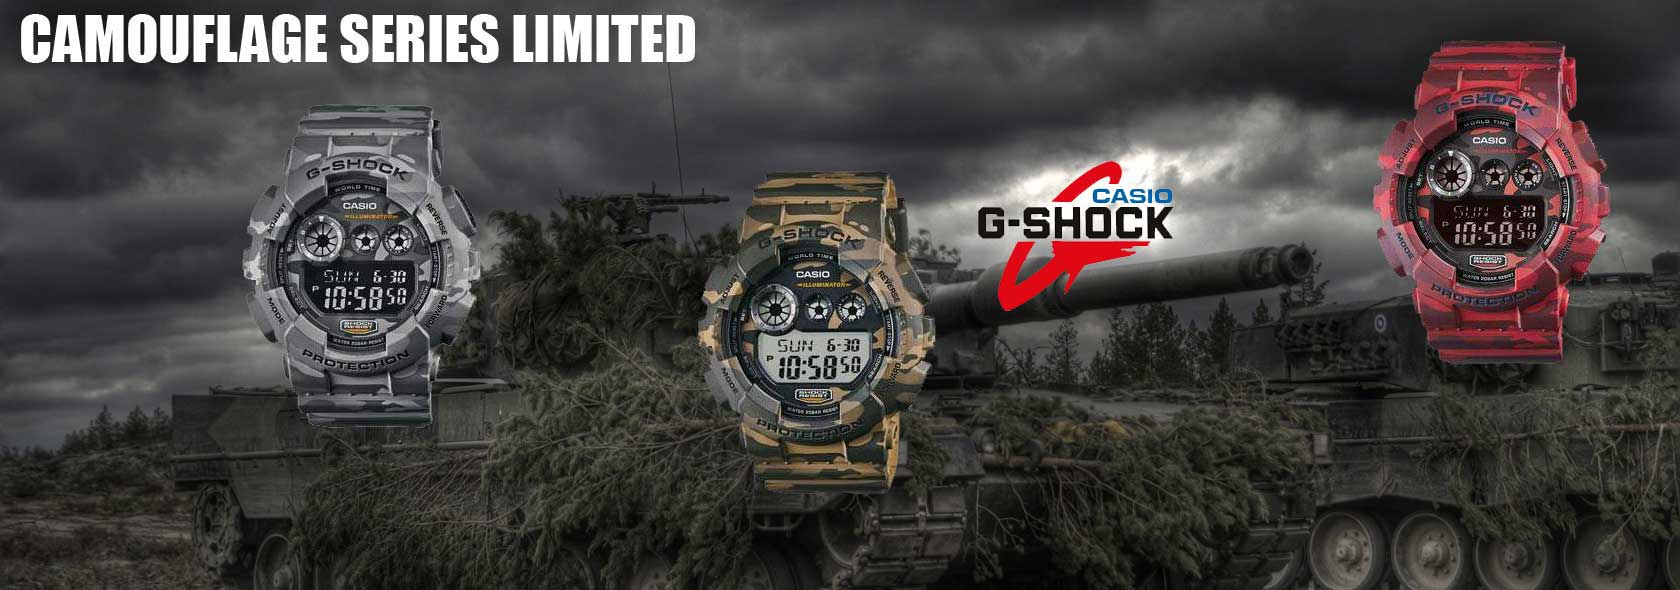 Casio Camouflage Limited Series